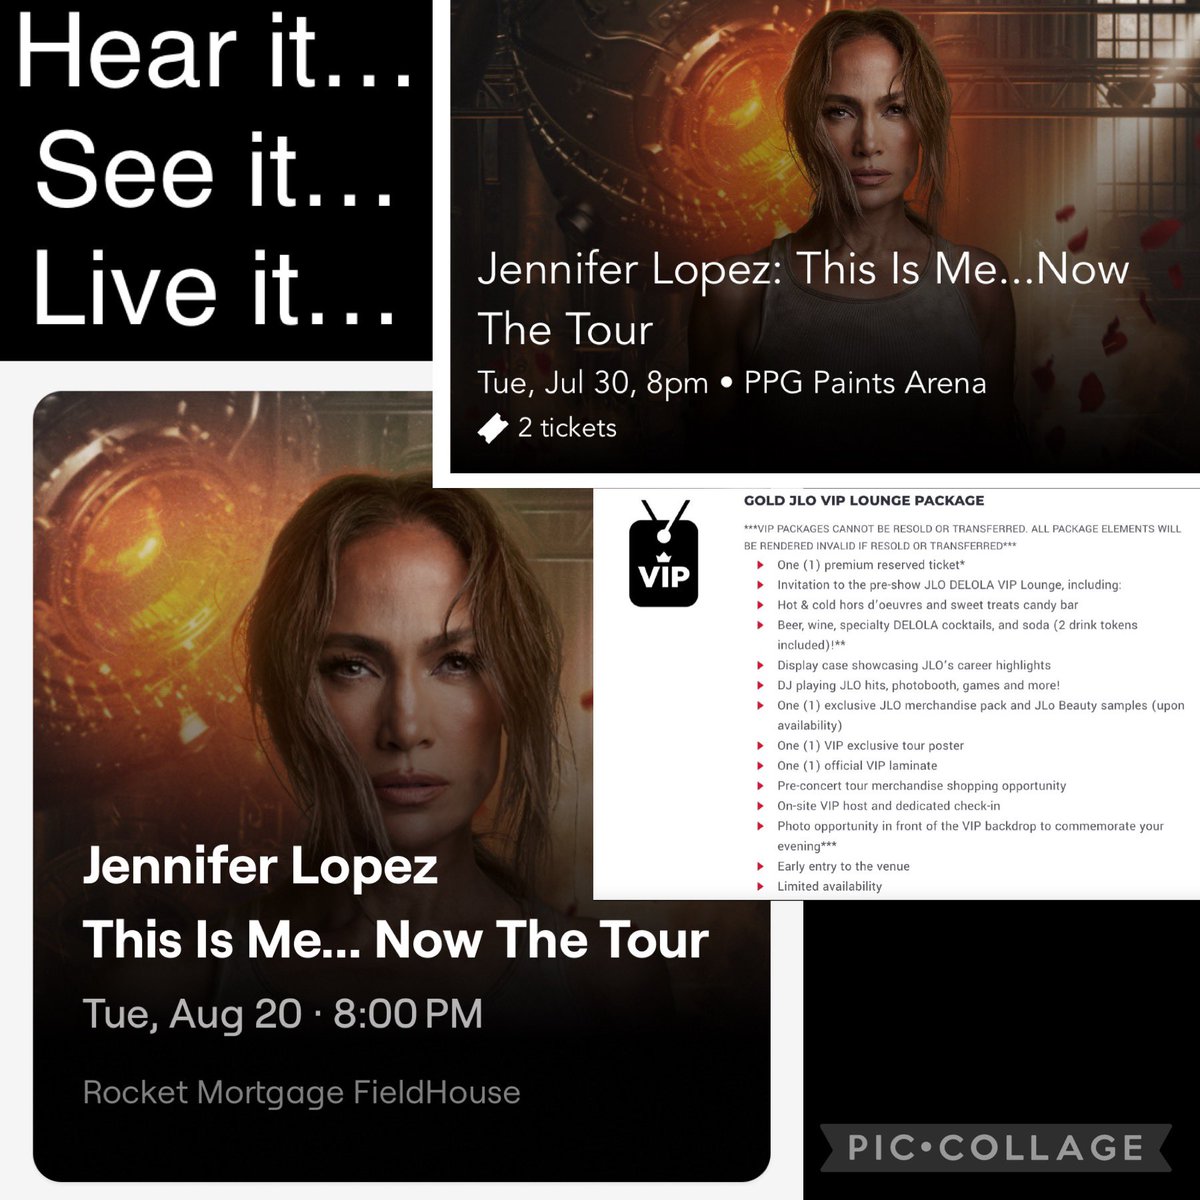 Can’t wait!!! @JLo @egt239 #ThisIsMeNow #JLovers